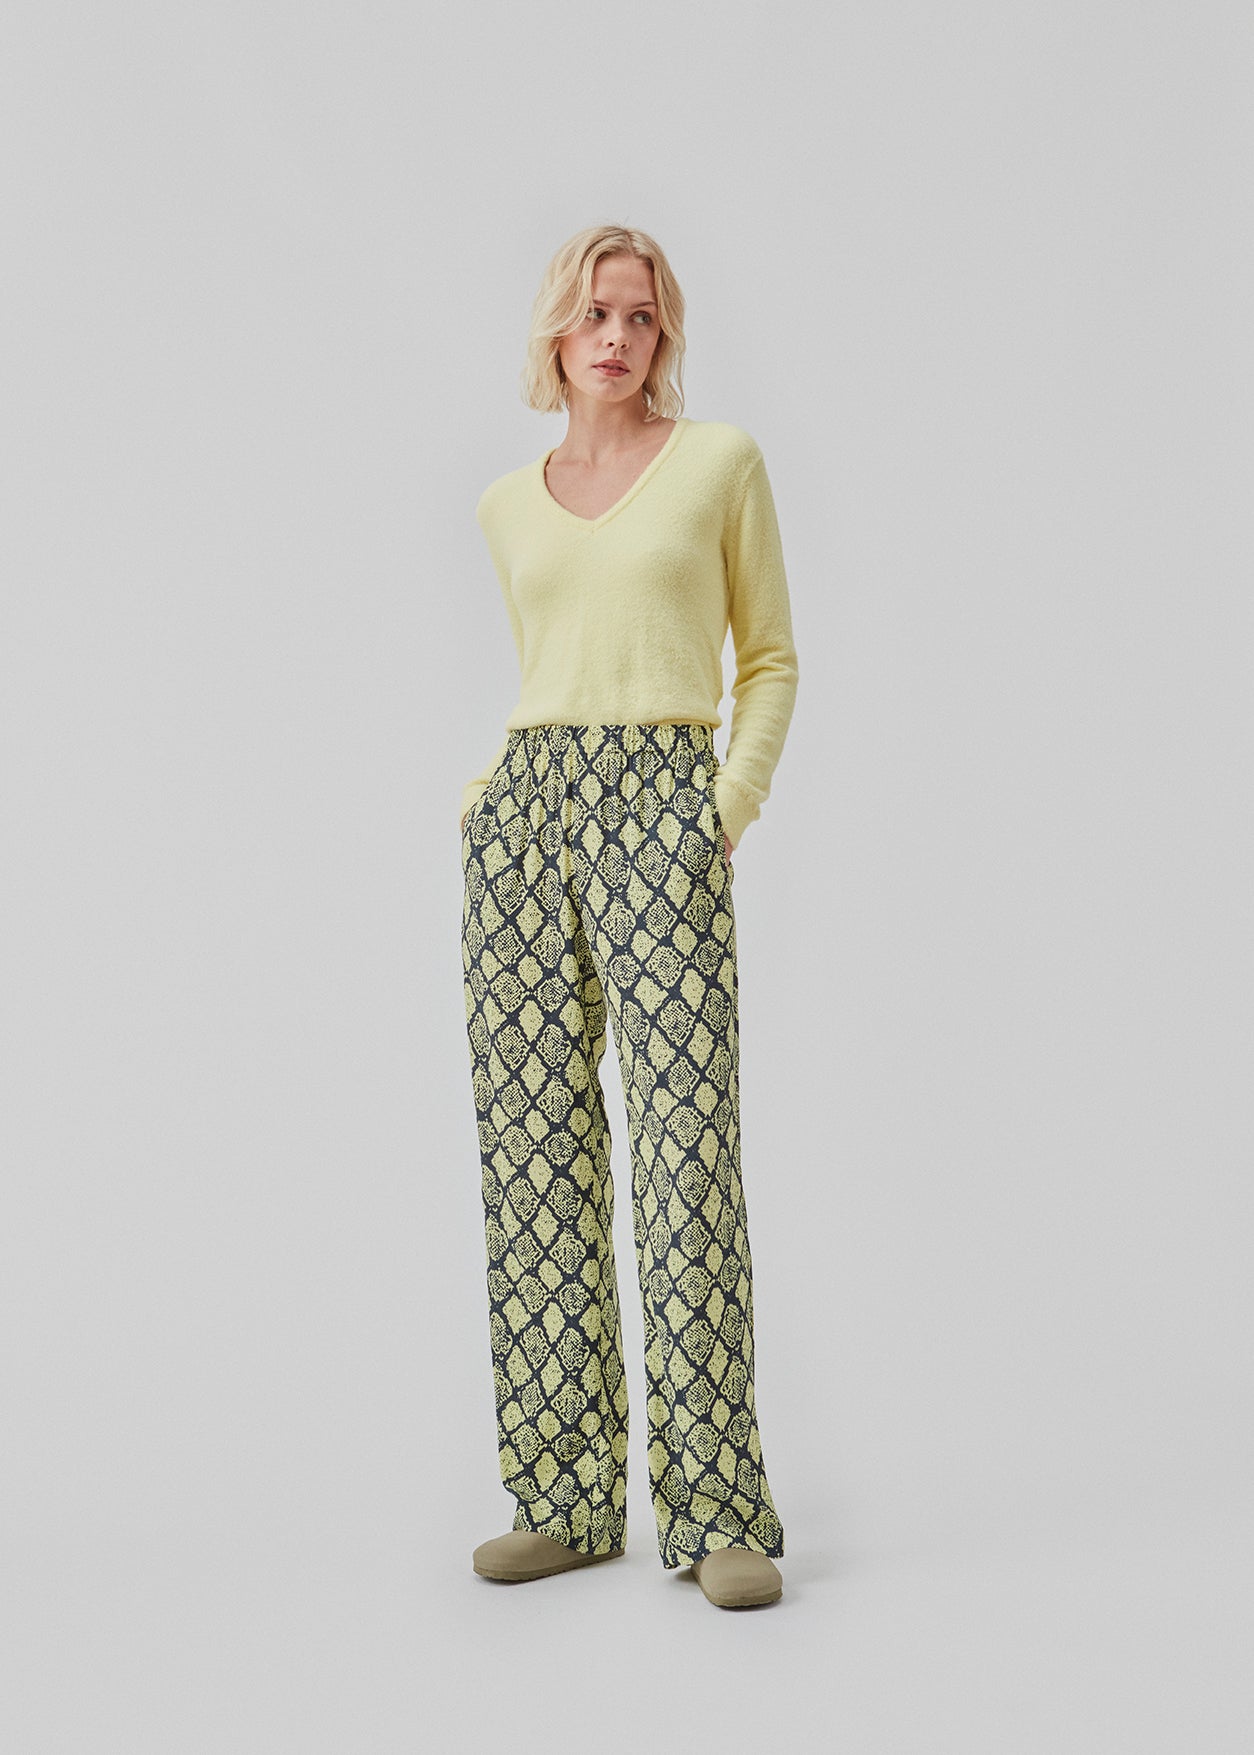 Moxy Collective Anthropologie Yellow Floral Modal Pajama Pants Size M